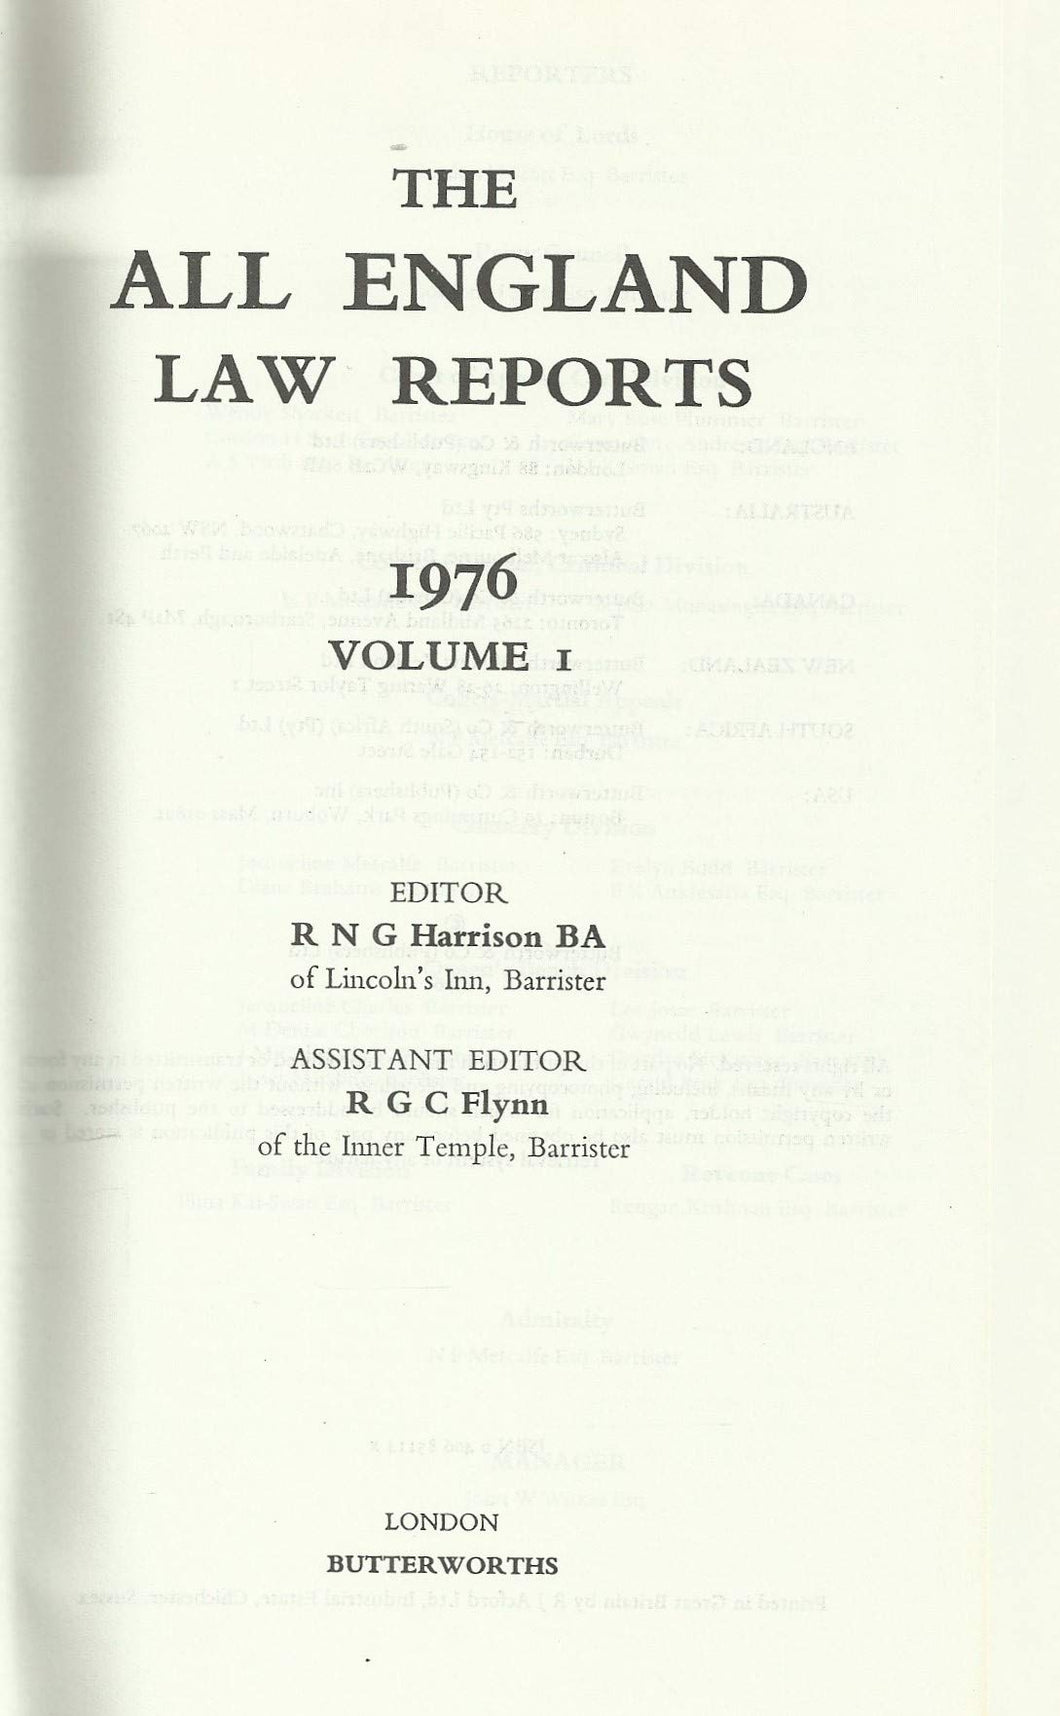 THE ALL ENGLAND LAW REPORTS 1976 VOLUME 1